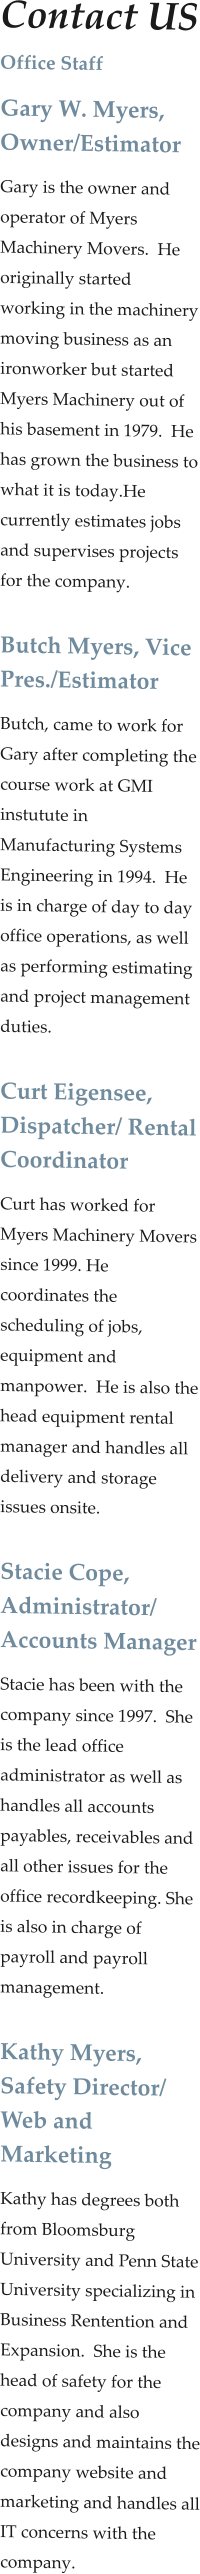 Contact US Office Staff Gary W. Myers, Owner/Estimator Gary is the owner and operator of Myers Machinery Movers.  He originally started working in the machinery moving business as an ironworker but started Myers Machinery out of his basement in 1979.  He has grown the business to what it is today.He currently estimates jobs and supervises projects for the company.  Butch Myers, Vice Pres./Estimator Butch, came to work for Gary after completing the course work at GMI instutute in Manufacturing Systems Engineering in 1994.  He is in charge of day to day office operations, as well as performing estimating and project management duties.    Curt Eigensee, Dispatcher/ Rental Coordinator Curt has worked for Myers Machinery Movers since 1999. He coordinates the scheduling of jobs, equipment and manpower.  He is also the head equipment rental manager and handles all delivery and storage issues onsite.  Stacie Cope, Administrator/ Accounts Manager Stacie has been with the company since 1997.  She is the lead office administrator as well as handles all accounts payables, receivables and all other issues for the office recordkeeping. She is also in charge of payroll and payroll management.   Kathy Myers, Safety Director/ Web and Marketing  Kathy has degrees both from Bloomsburg University and Penn State University specializing in Business Rentention and Expansion.  She is the head of safety for the company and also designs and maintains the company website and marketing and handles all IT concerns with the company.